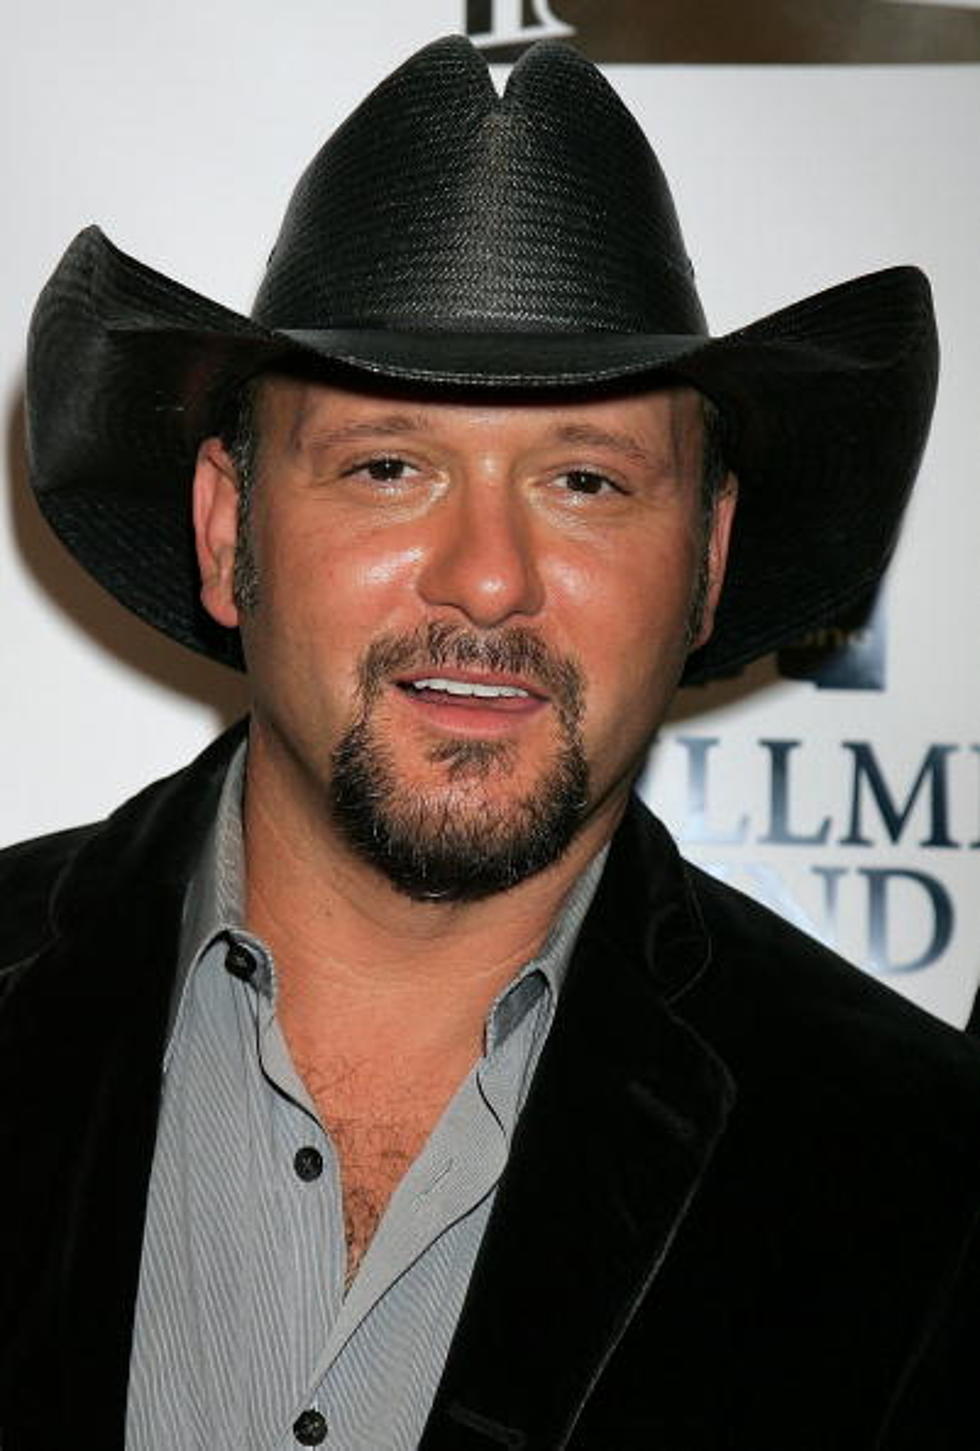 Tim McGraw Offers New Scent With Belt Buckle In Contest